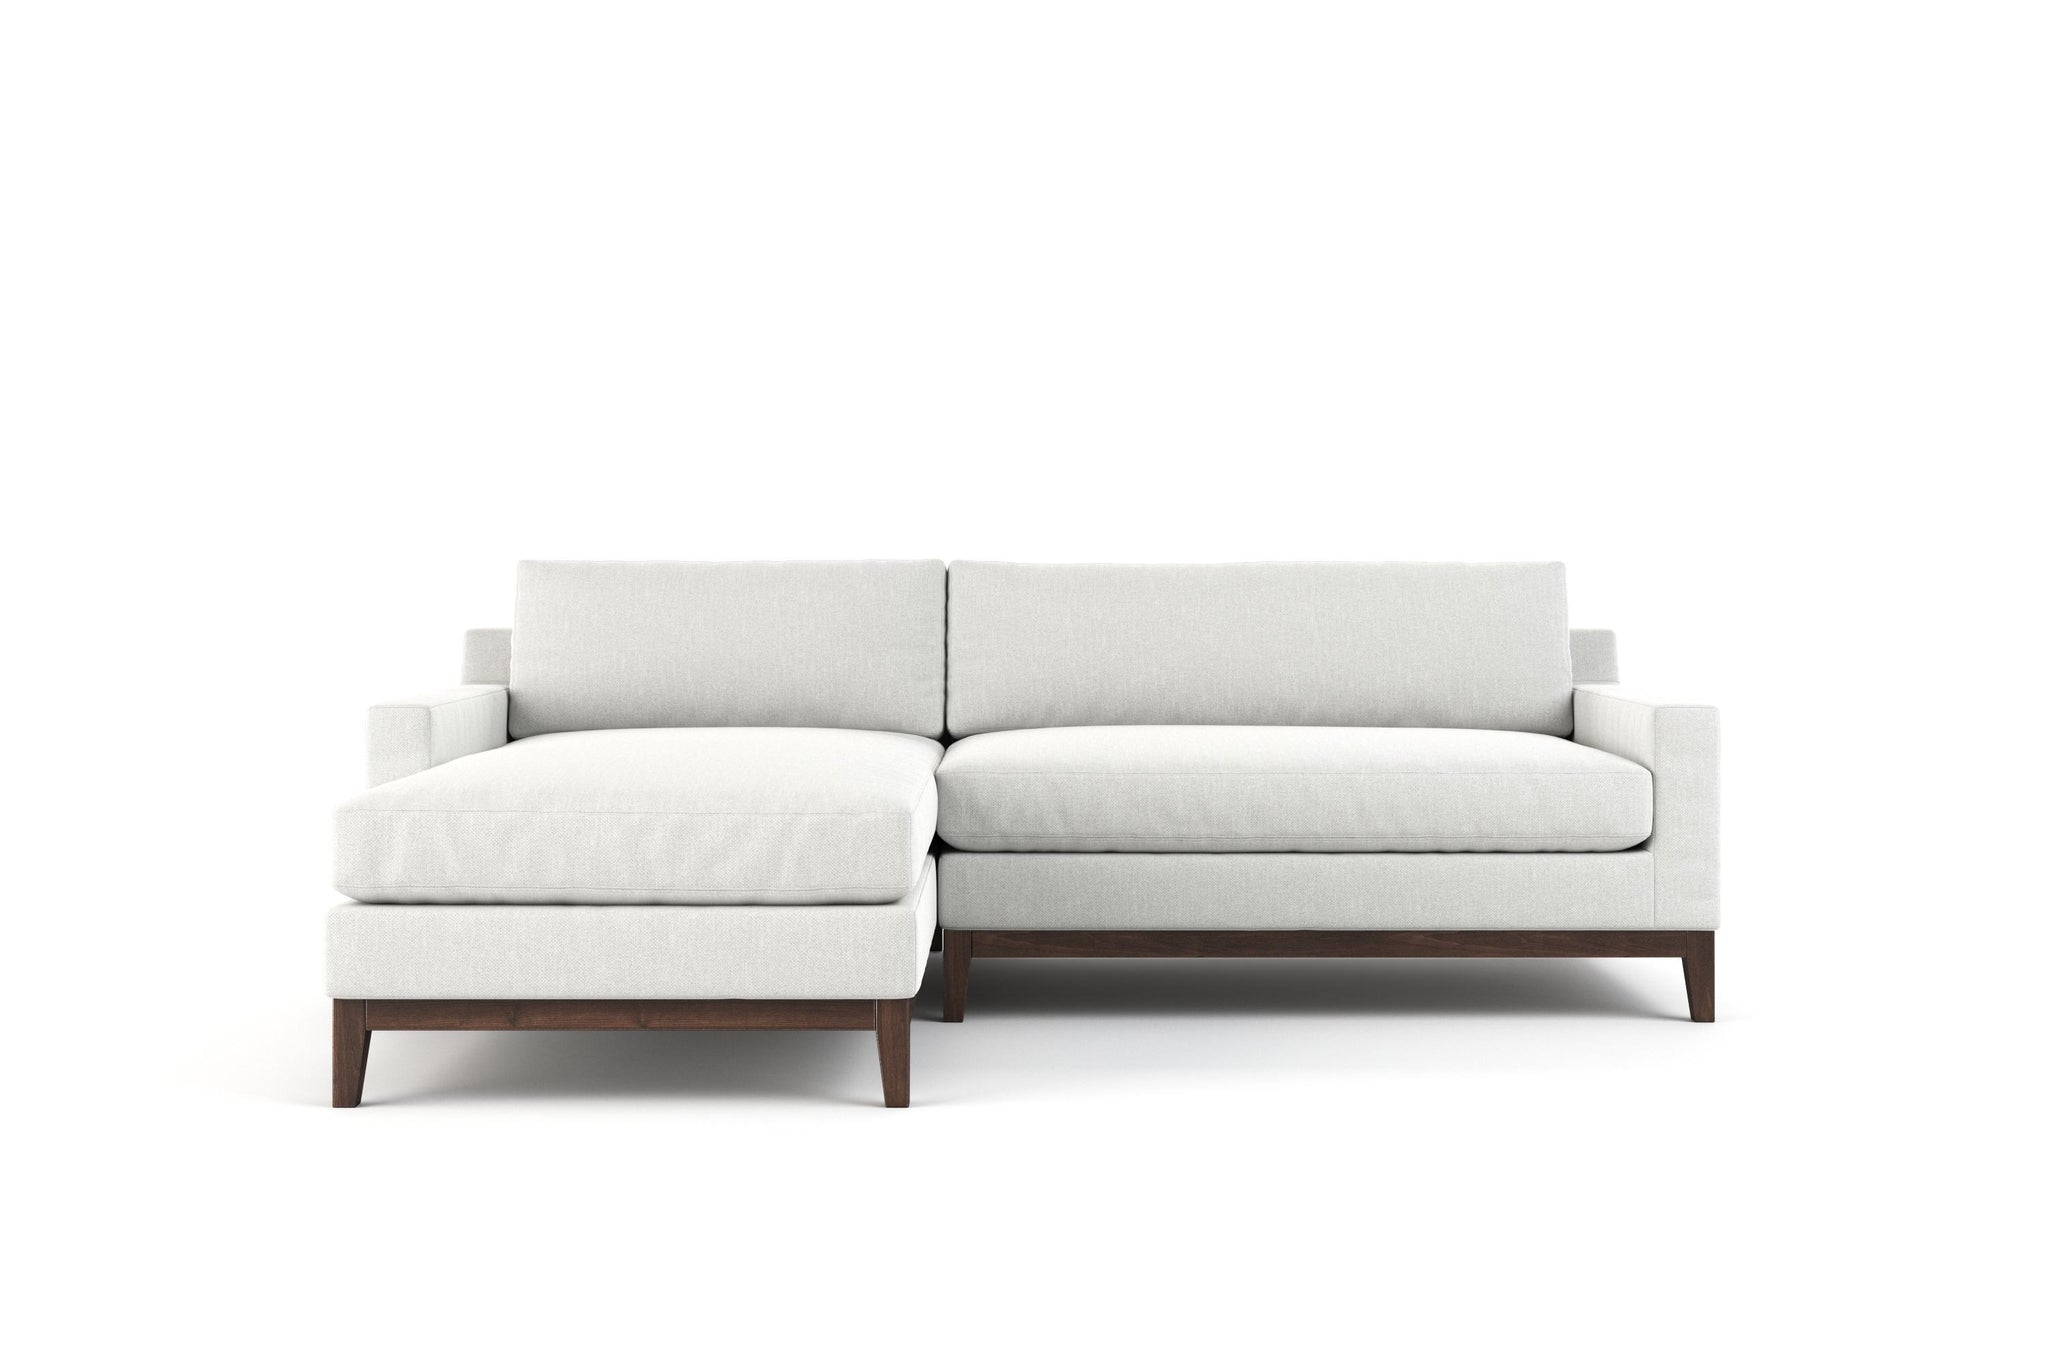 Big Sur Sofa with Chaise